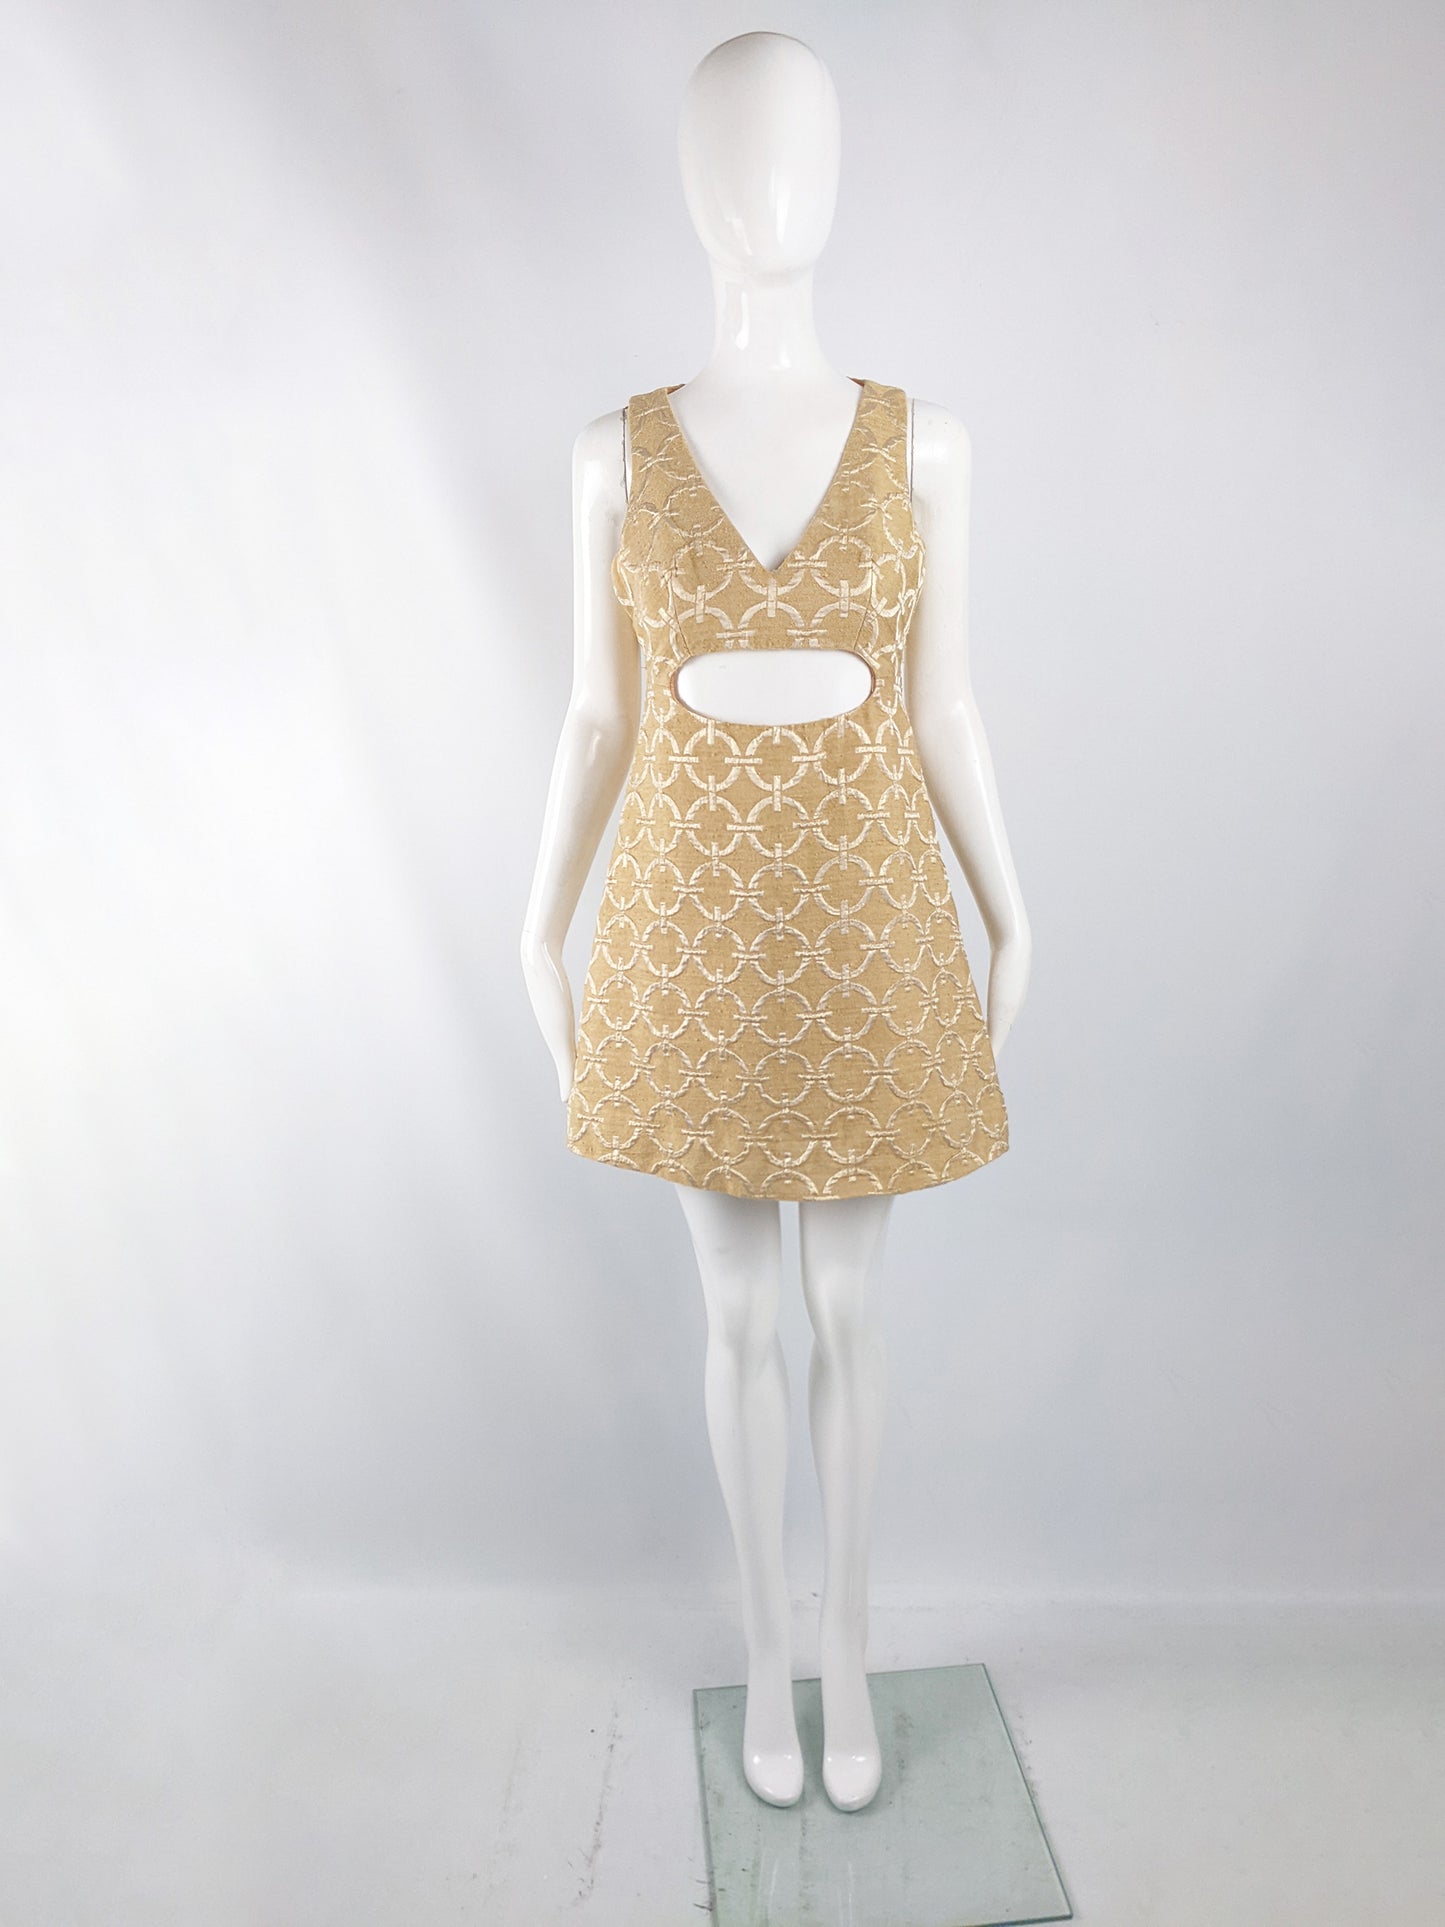 Peter Collins Vintage Gold Brocade Space Age Cut Out Dress, 1960s